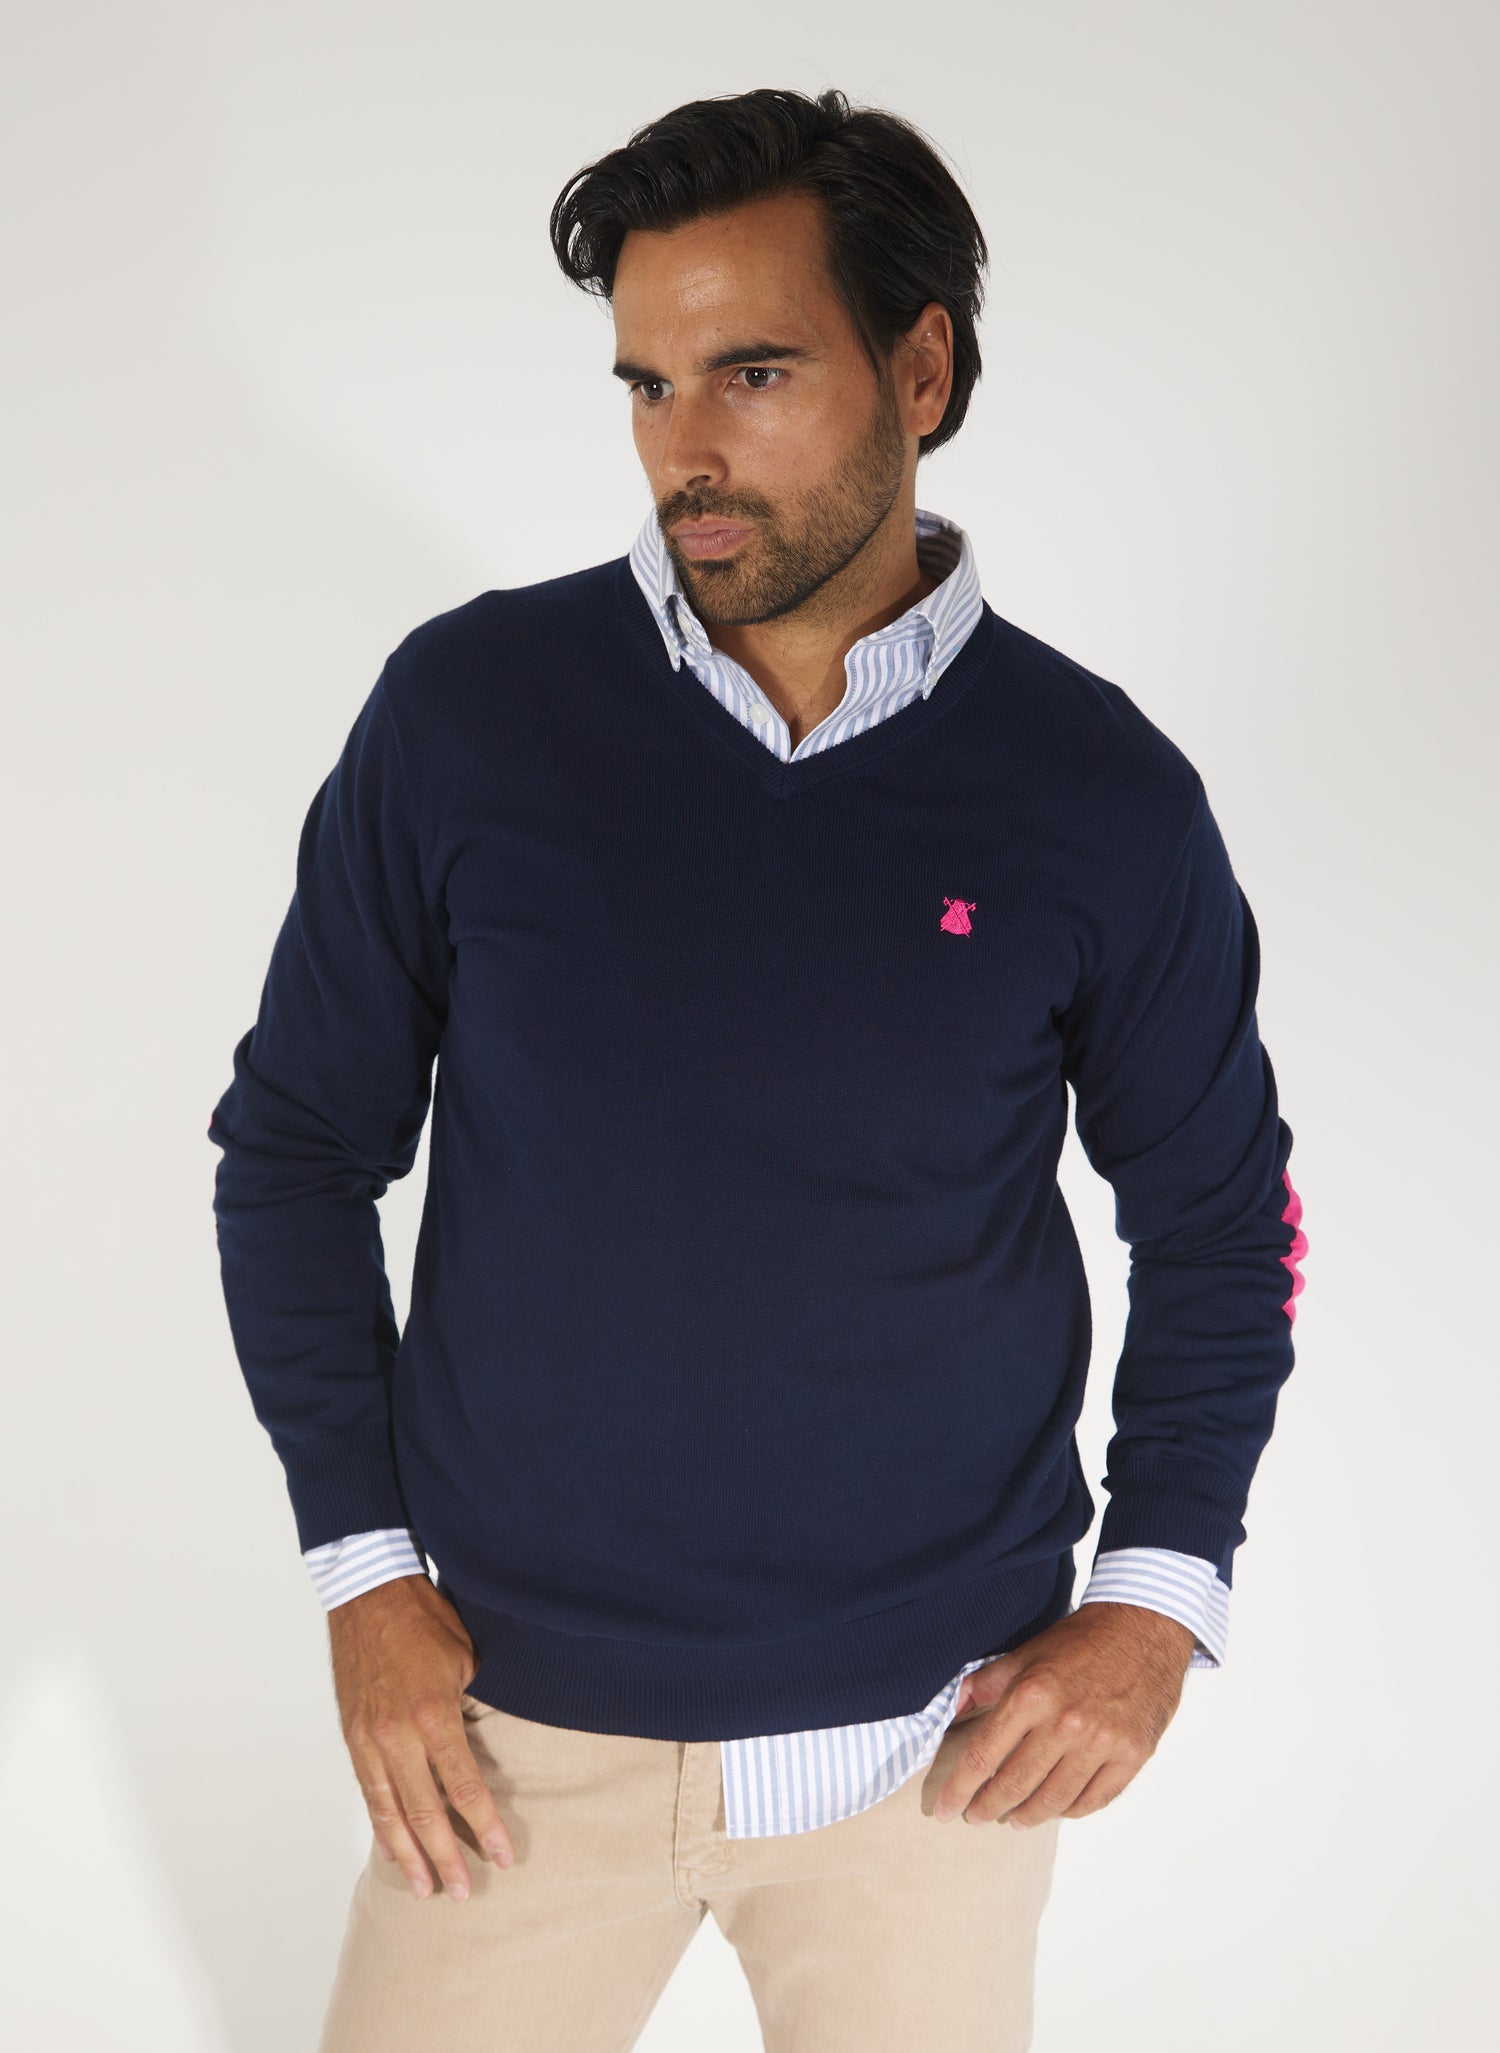 Navy Blue Sweater with Pink Elbow Pads for Man